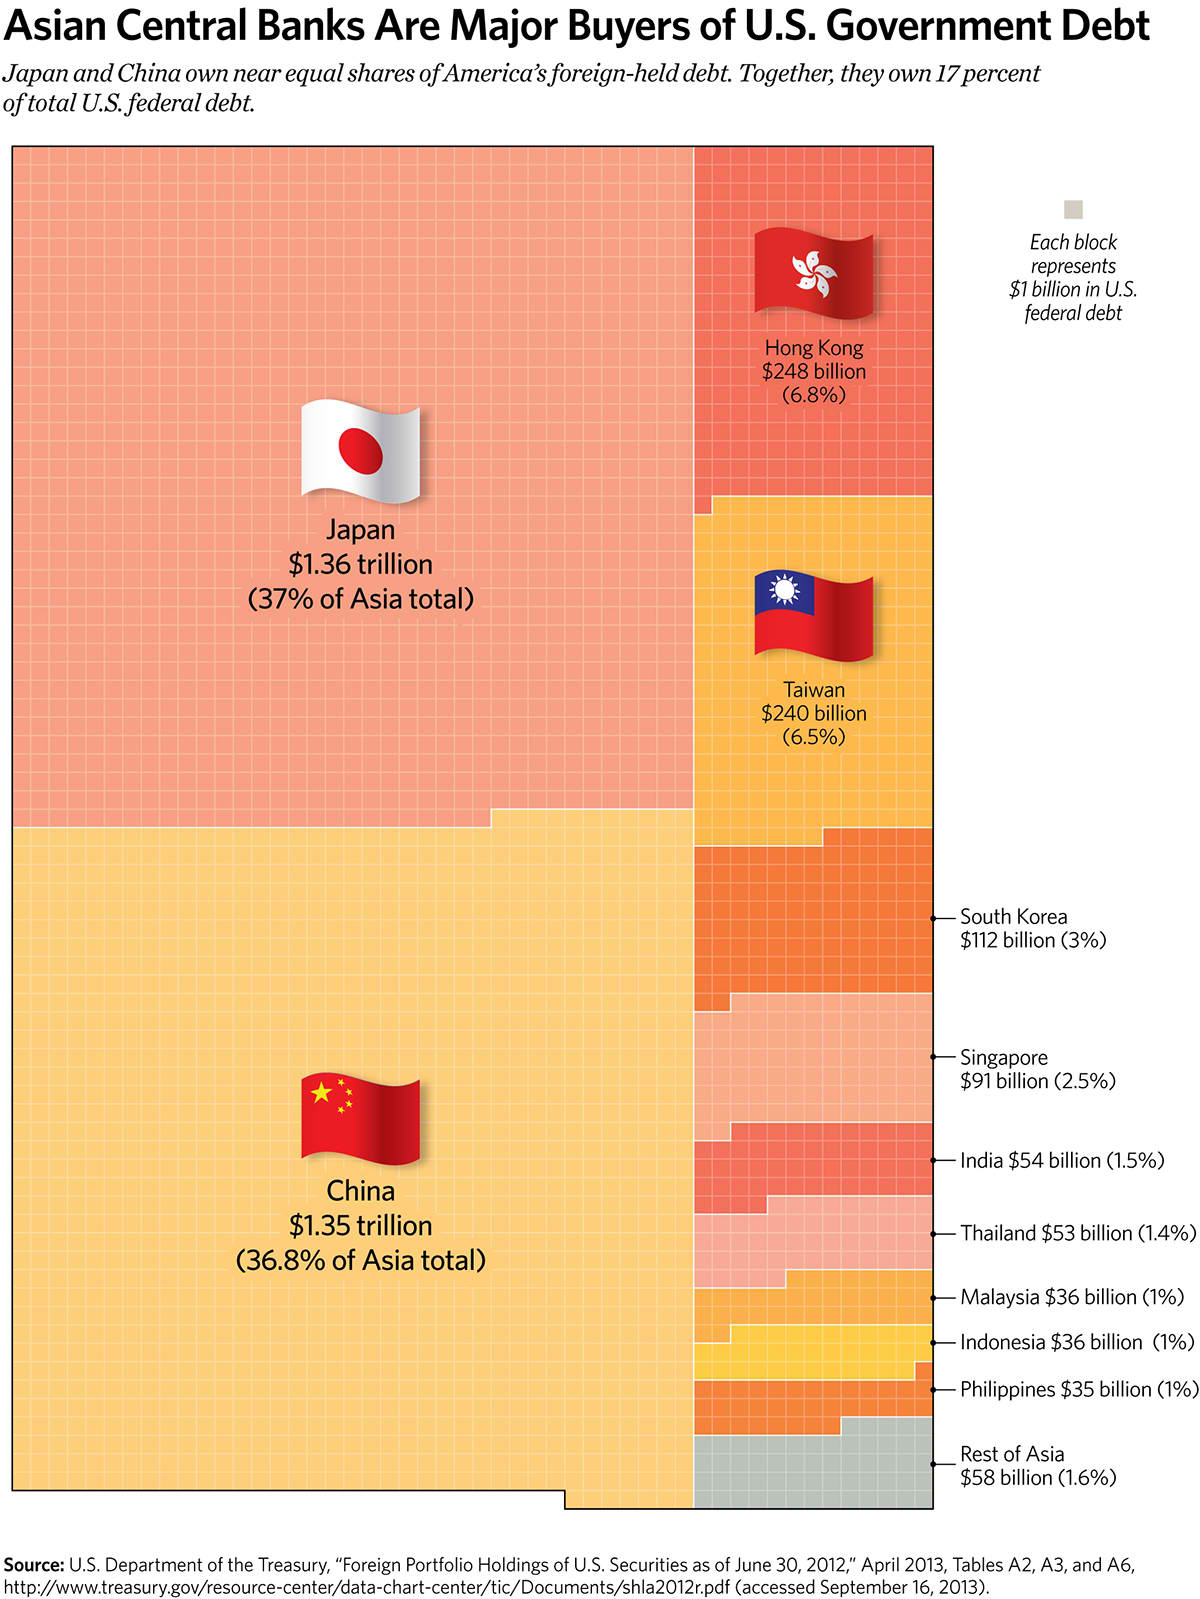 Asian Central Banks Are Major Buyers of U.S. Government Debt